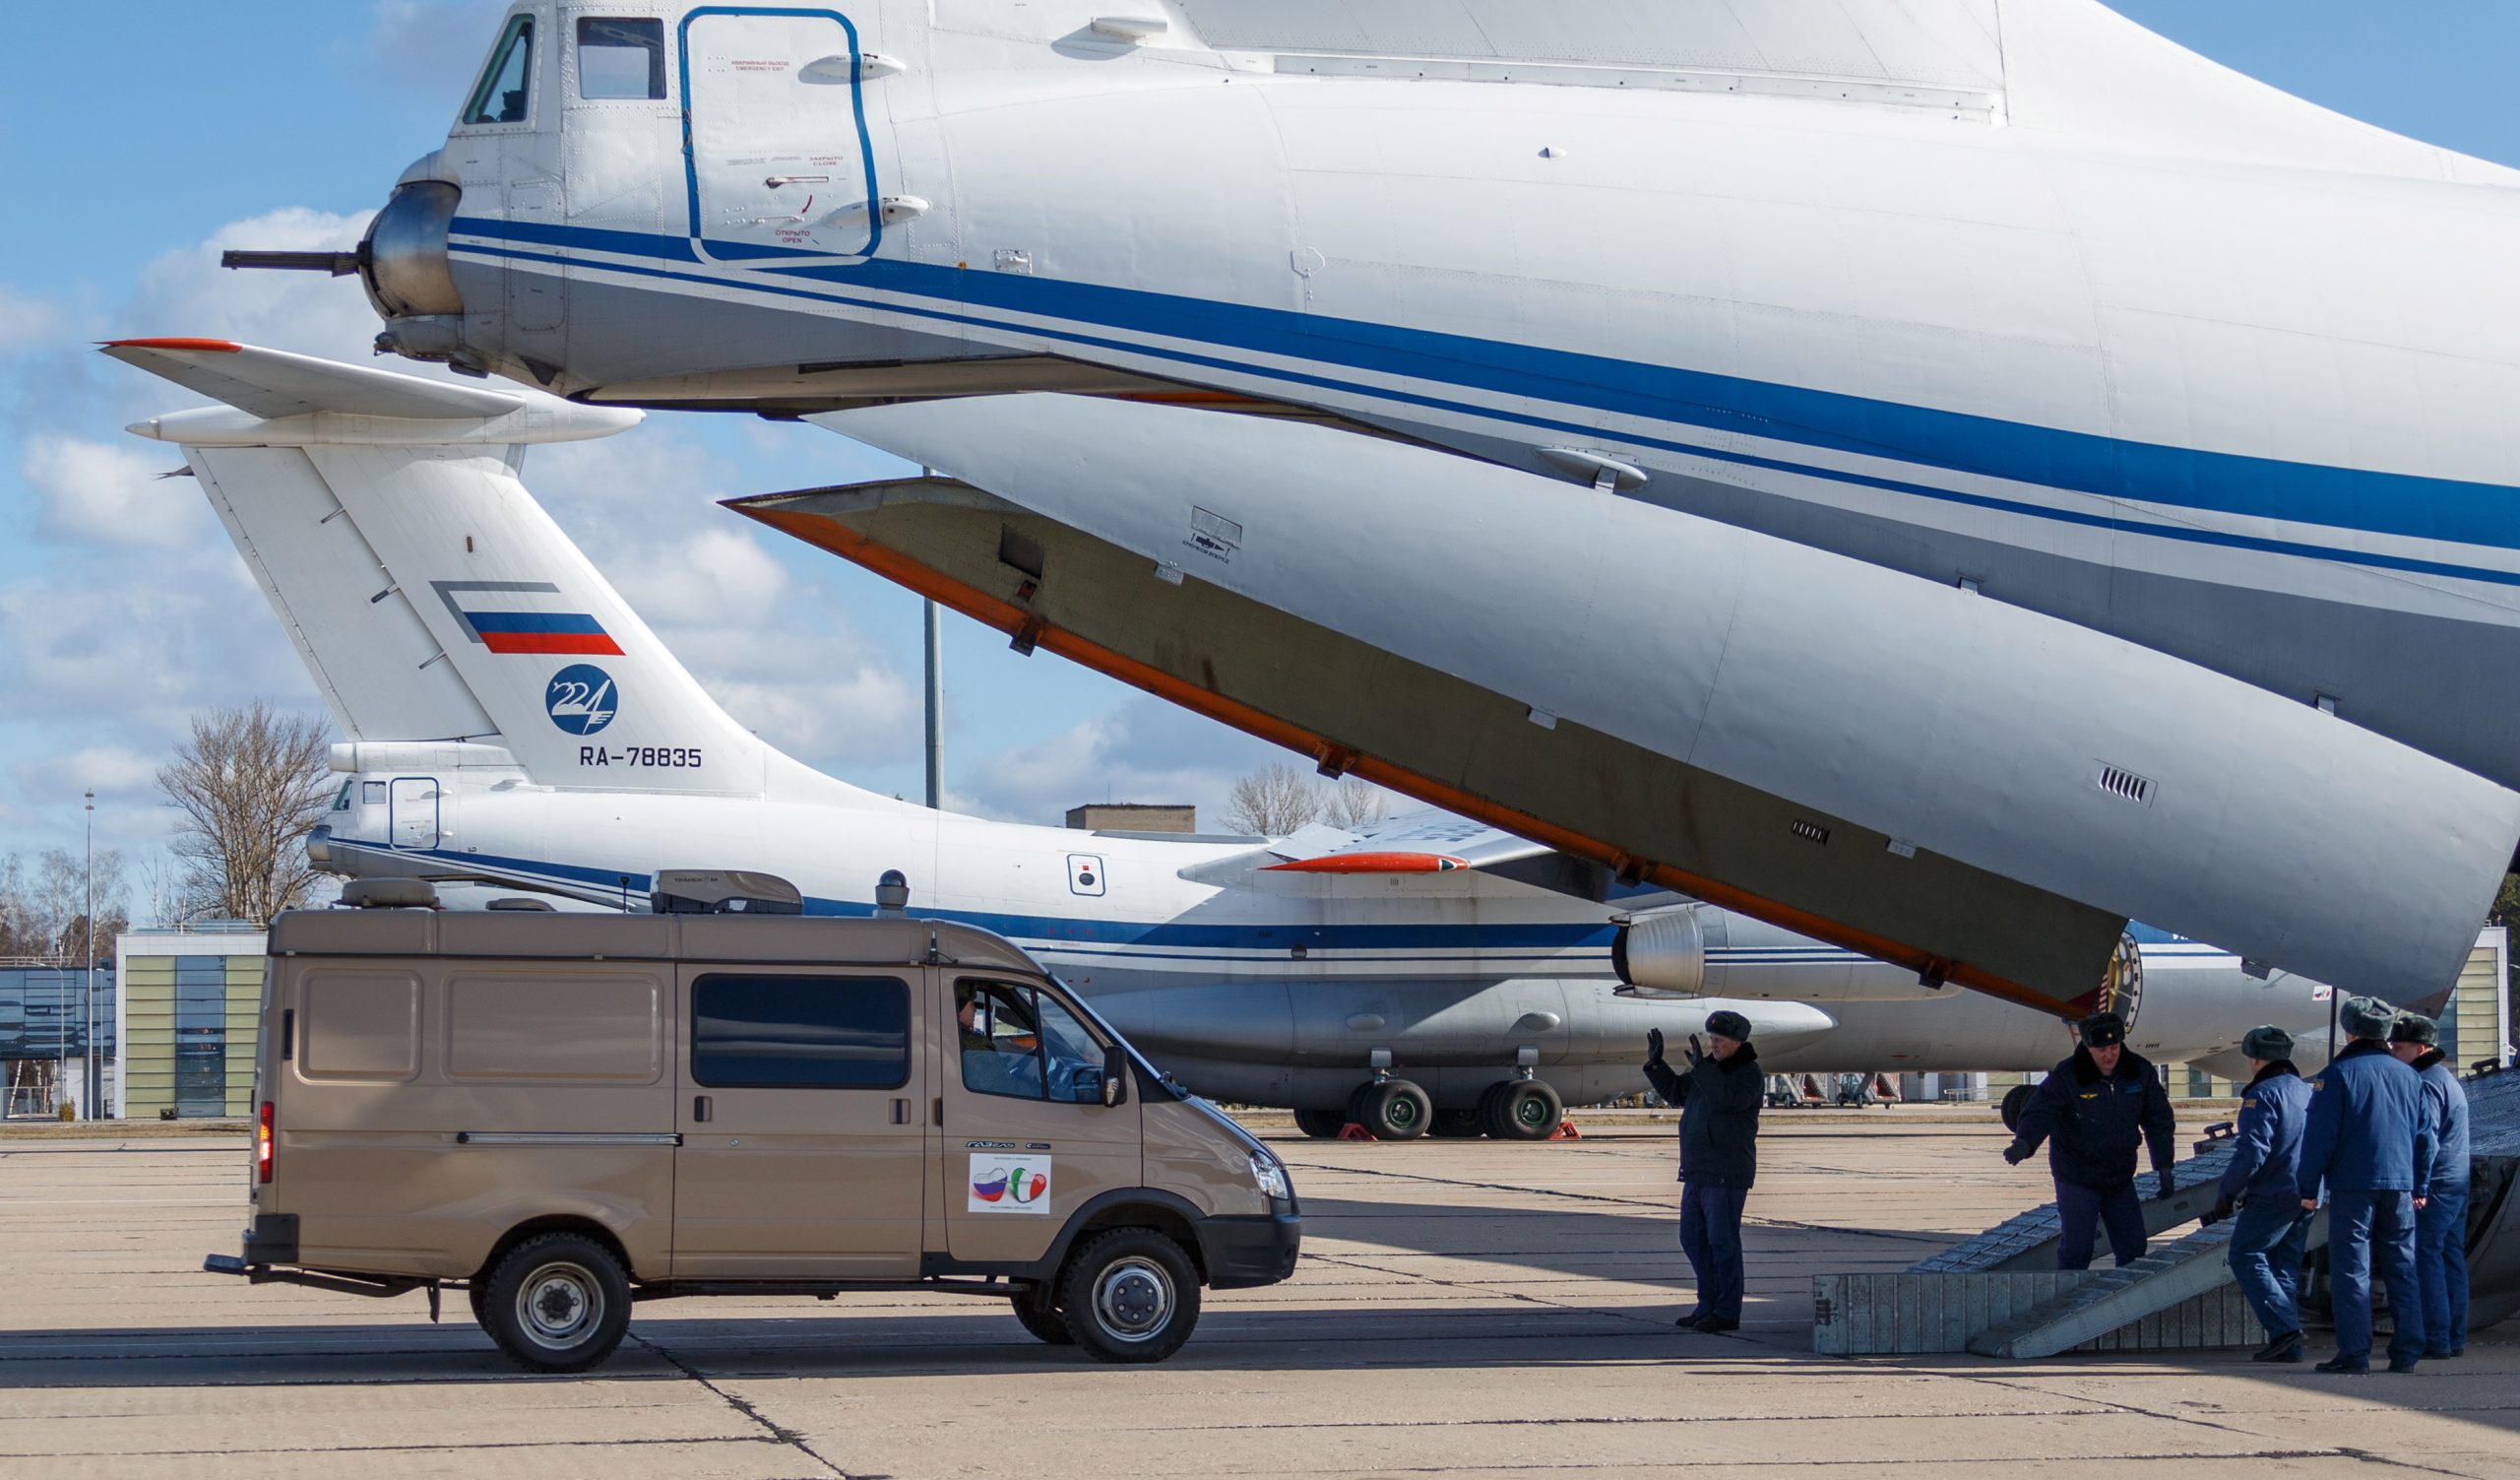 epa08313306 A handout still image made available on 22 March 2020 by the Russian Defense Ministry shows Russian specialists preparing an Ilyushin IL-76 transport aircraft of Russian Defense Ministry for depart to Italy at the Chkalovsky military airport outside Moscow, Russia. The Russian Defense Ministry has prepared nine transport aircrafts for bring eight teams of military virologists and medical equipment to Italy as part of continuing efforts to prevent the spread of the SARS-CoV-2 coronavirus which causes the Covid-19 disease.  EPA/ALEXEI YERESHKO / RUSSIAN DEFENCE MINISTRY PRESS SERVICE HANDOUT  HANDOUT EDITORIAL USE ONLY/NO SALES